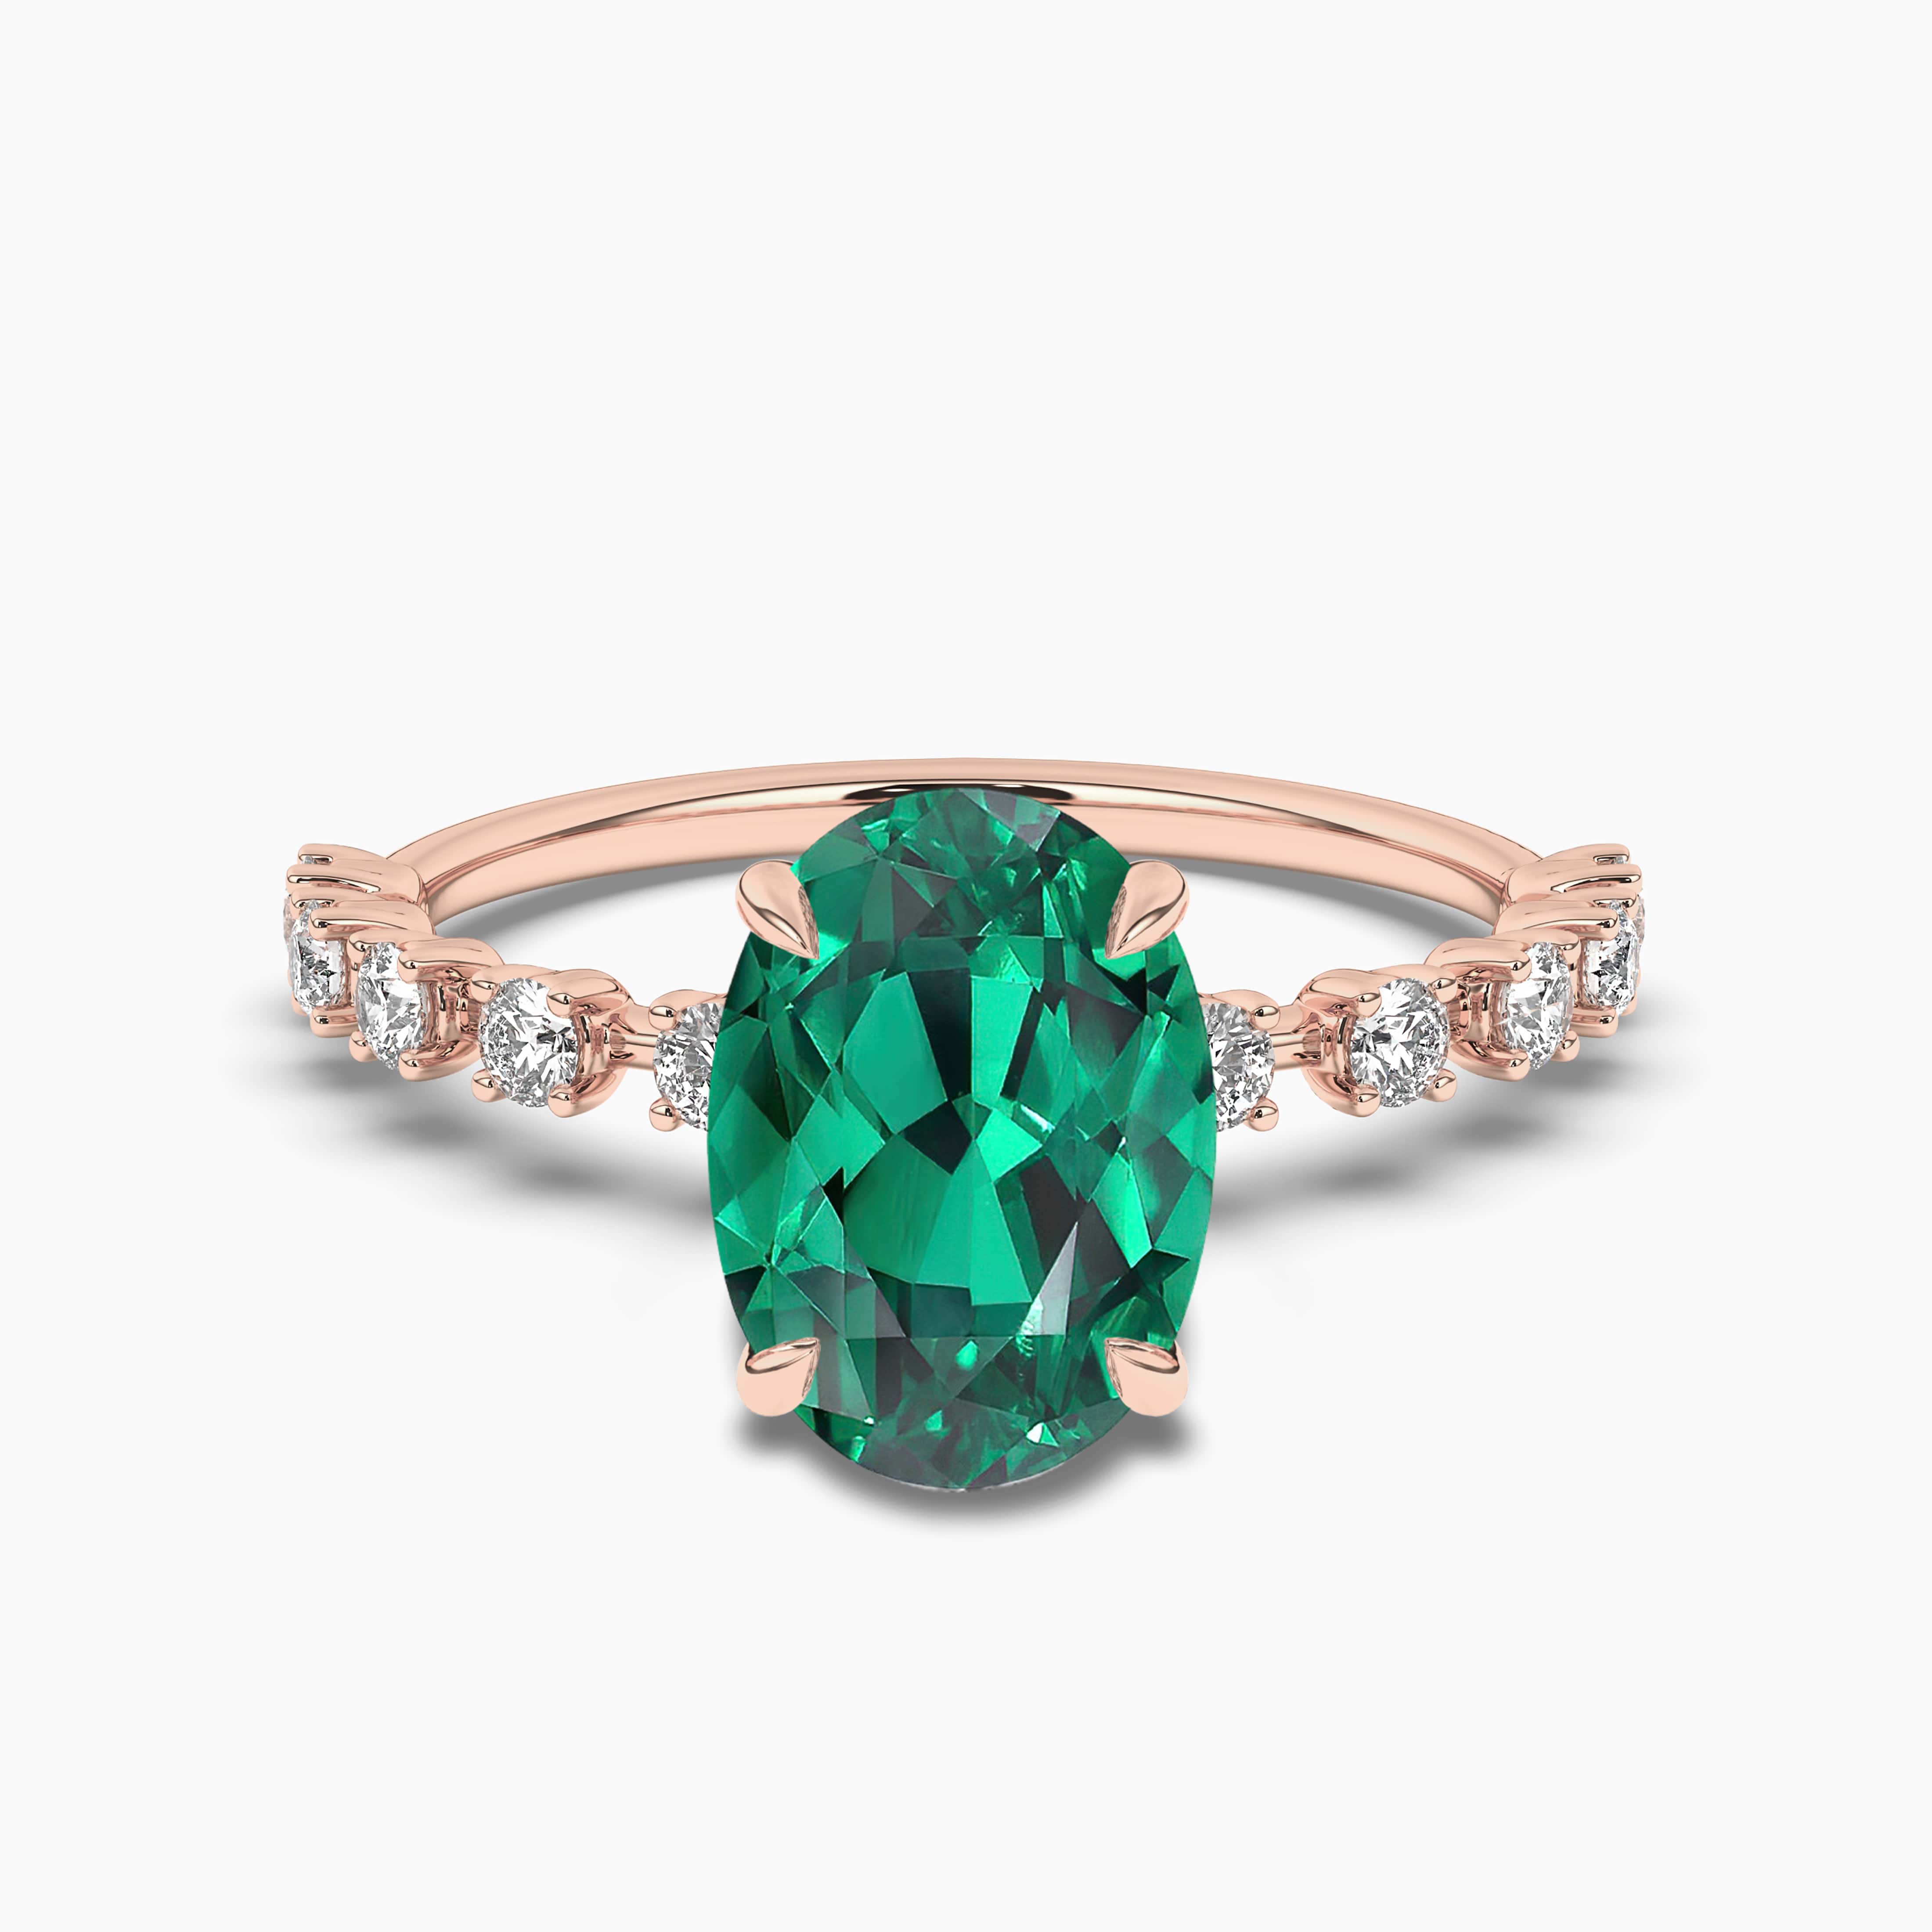 RING WITH EMERALD AND BRILLIANTS IN ROSE GOLD